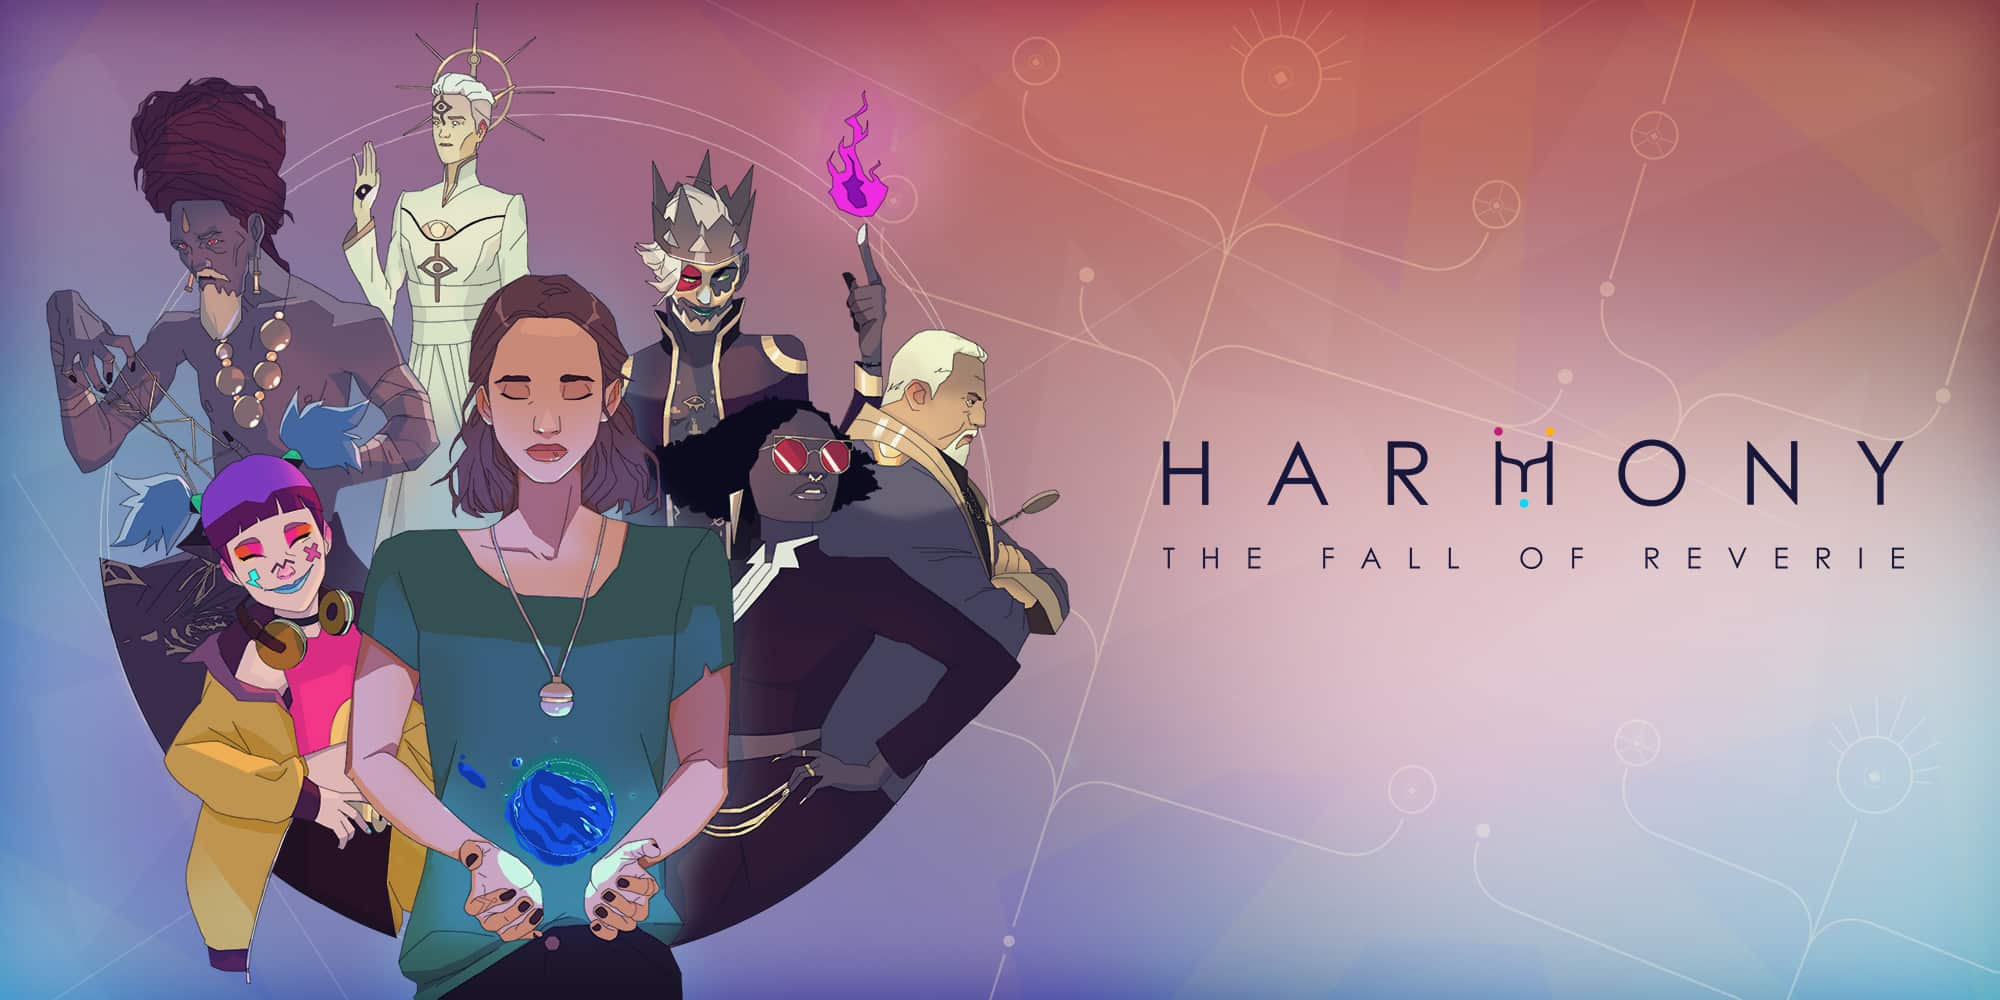 Harmony: The Fall of Reverie Recensione